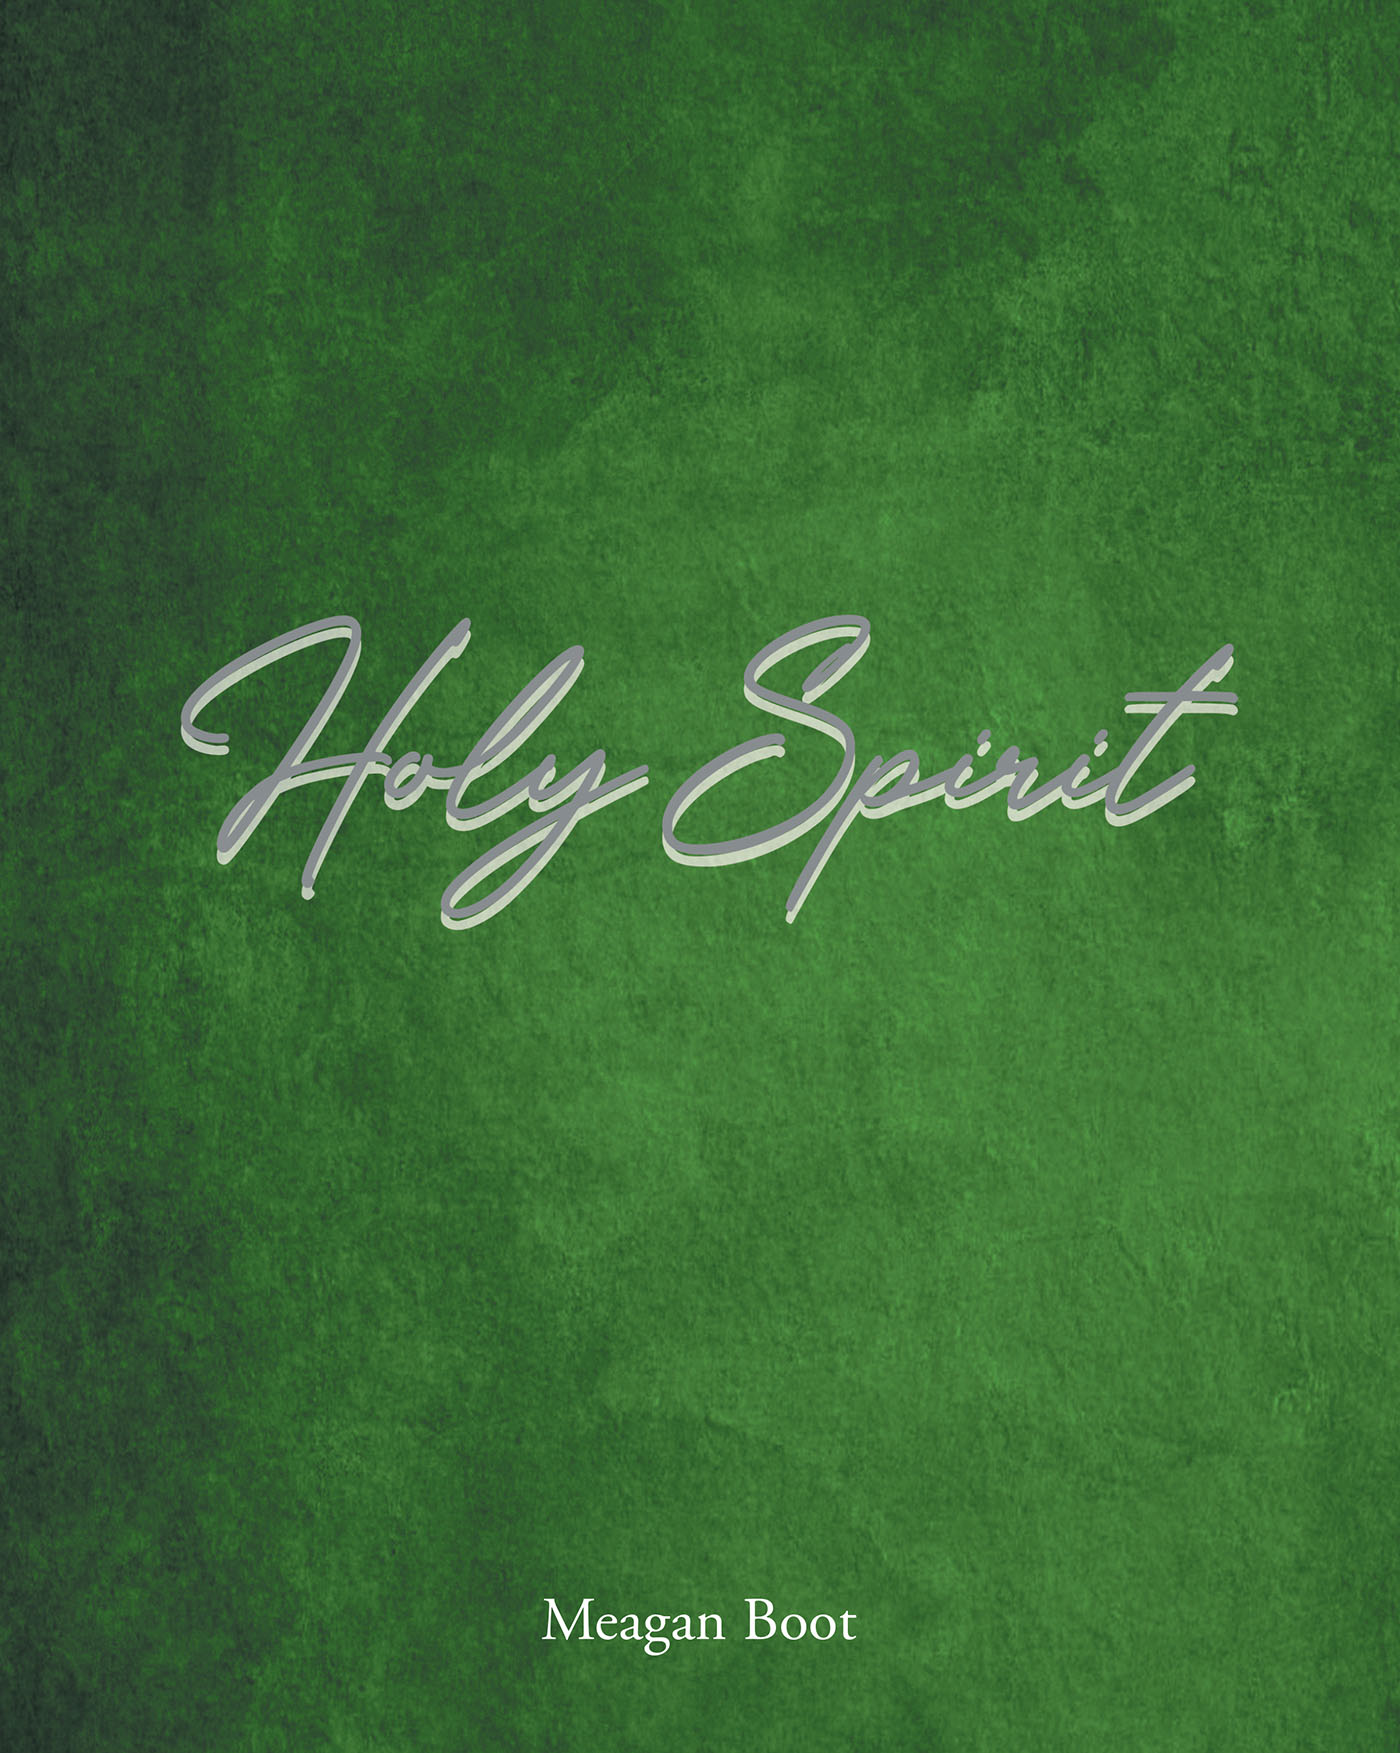 Meagan Boot’s Newly Released "Holy Spirit" is an Enjoyable Children’s Work That Discusses Key Components of the Christian Faith